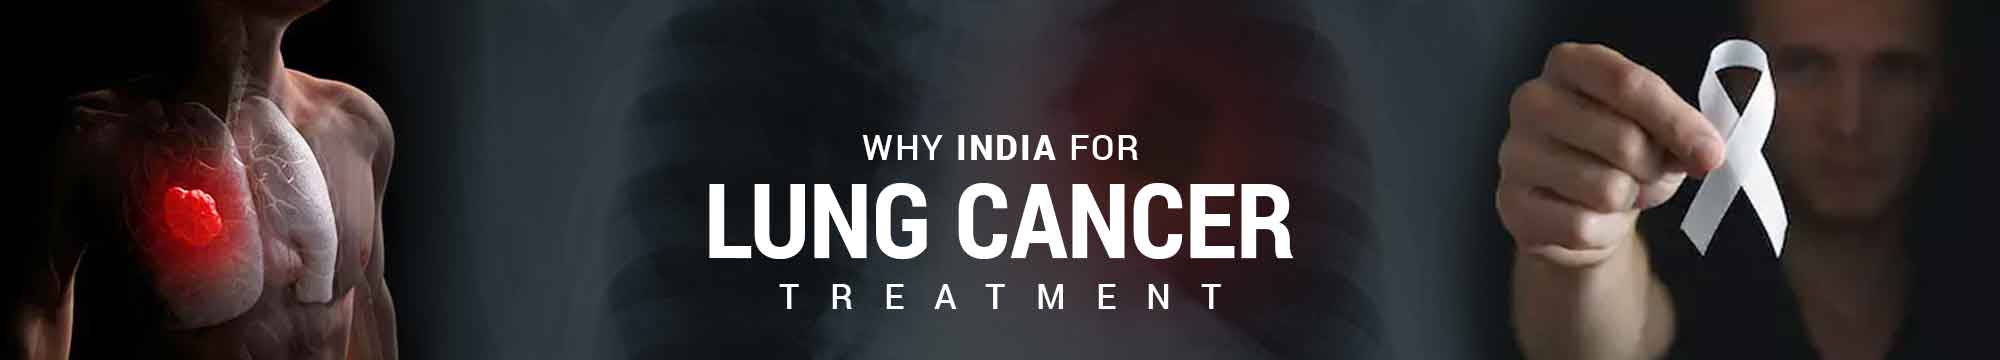 low cost lung cancer surgery India